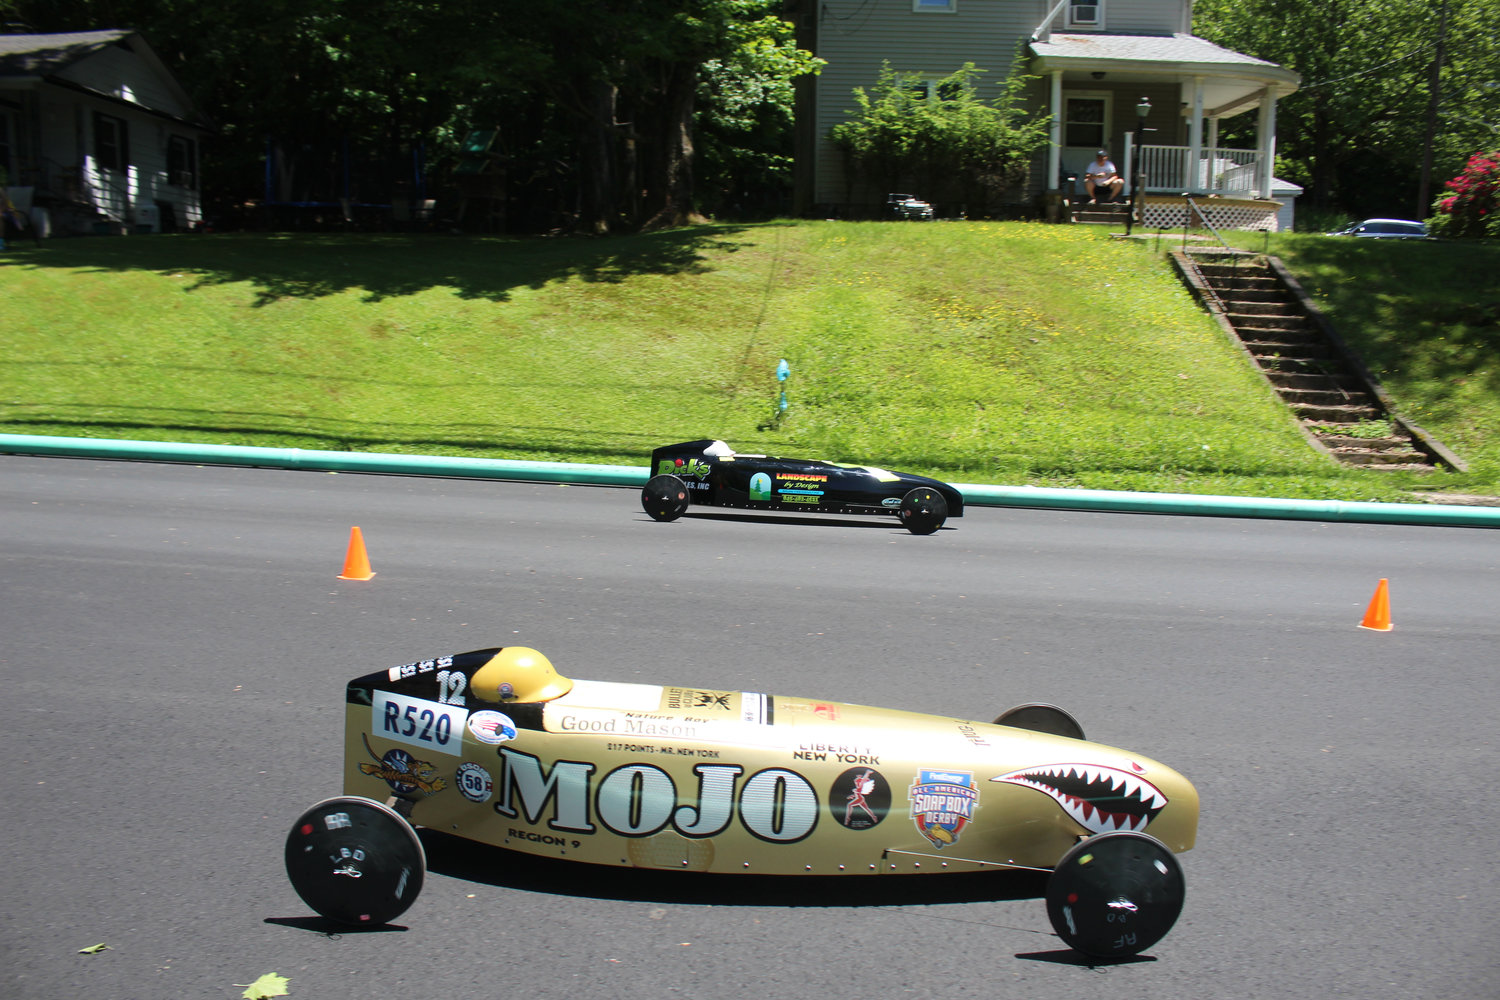 Mason Smith in his golden MOJO sponsored car races against Andrew Freidenstine in his car sponsored by Landscape by Design and Dick’s Auto Sales